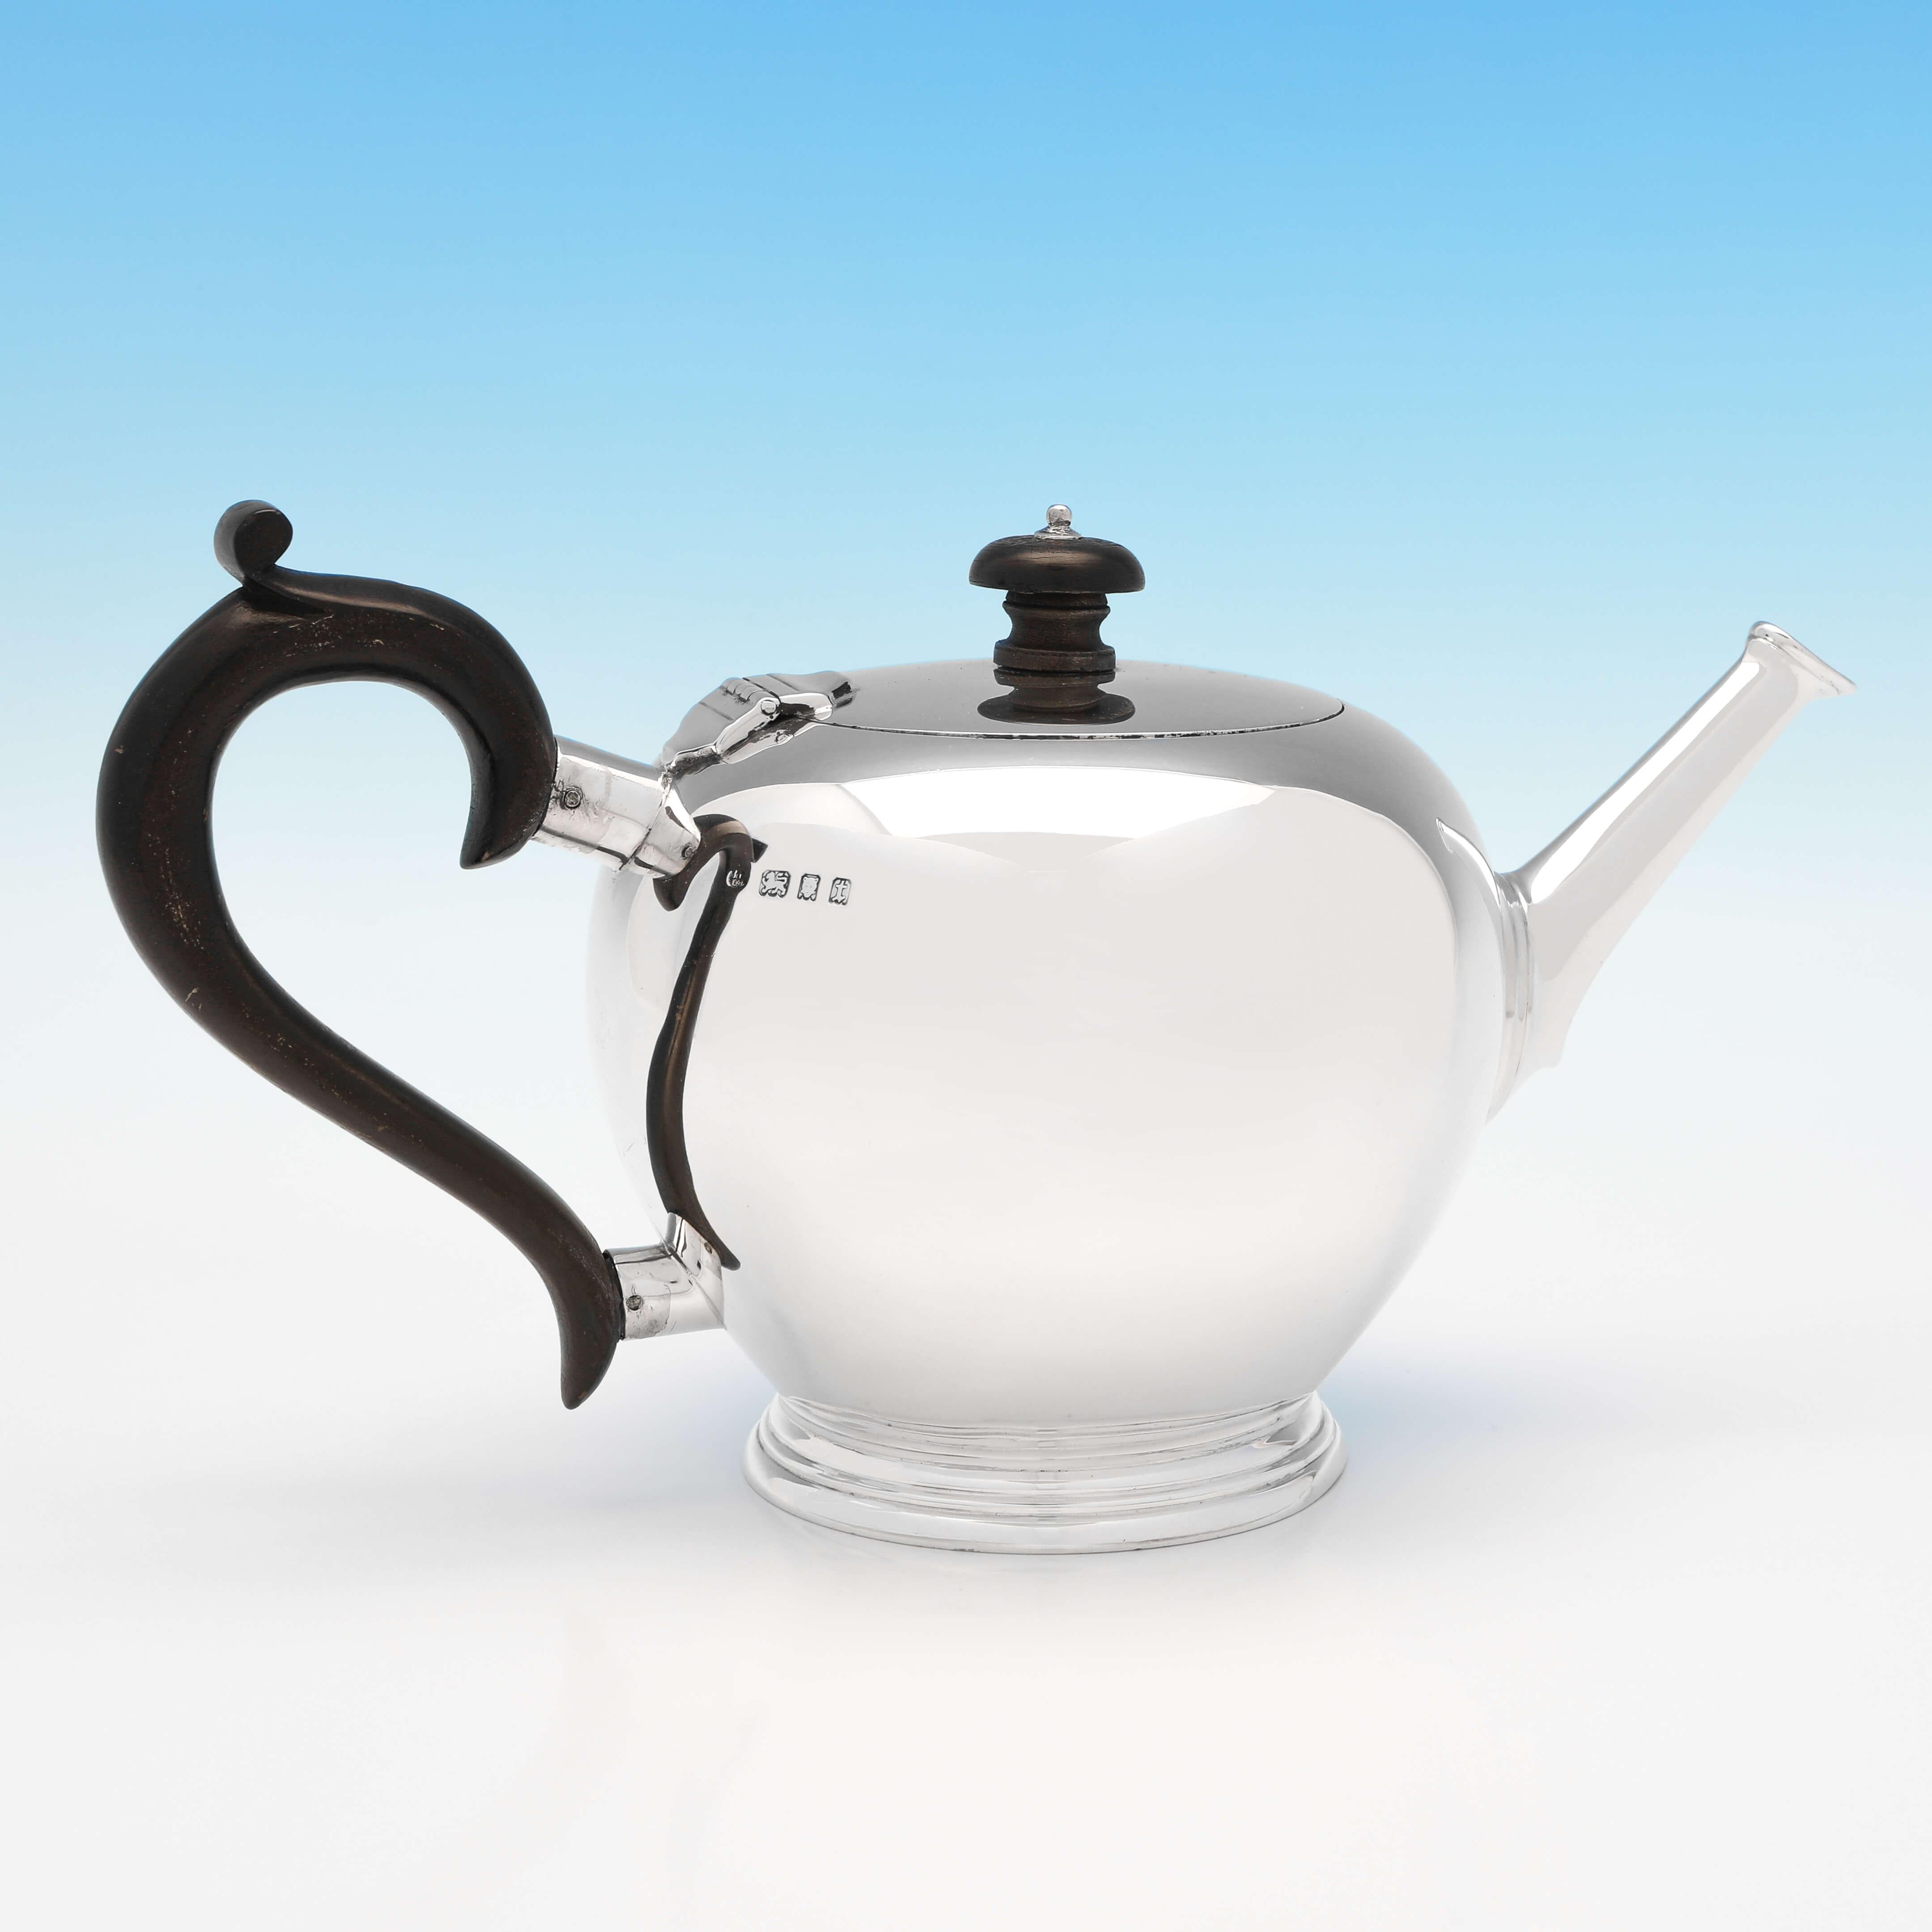 Hallmarked in London in 1934 by Blackmore & Fletcher Ltd., this handsome, Sterling Silver teapot, is in the 'Bullet' form, and has a wooden handle and finial. The teapot measures 6